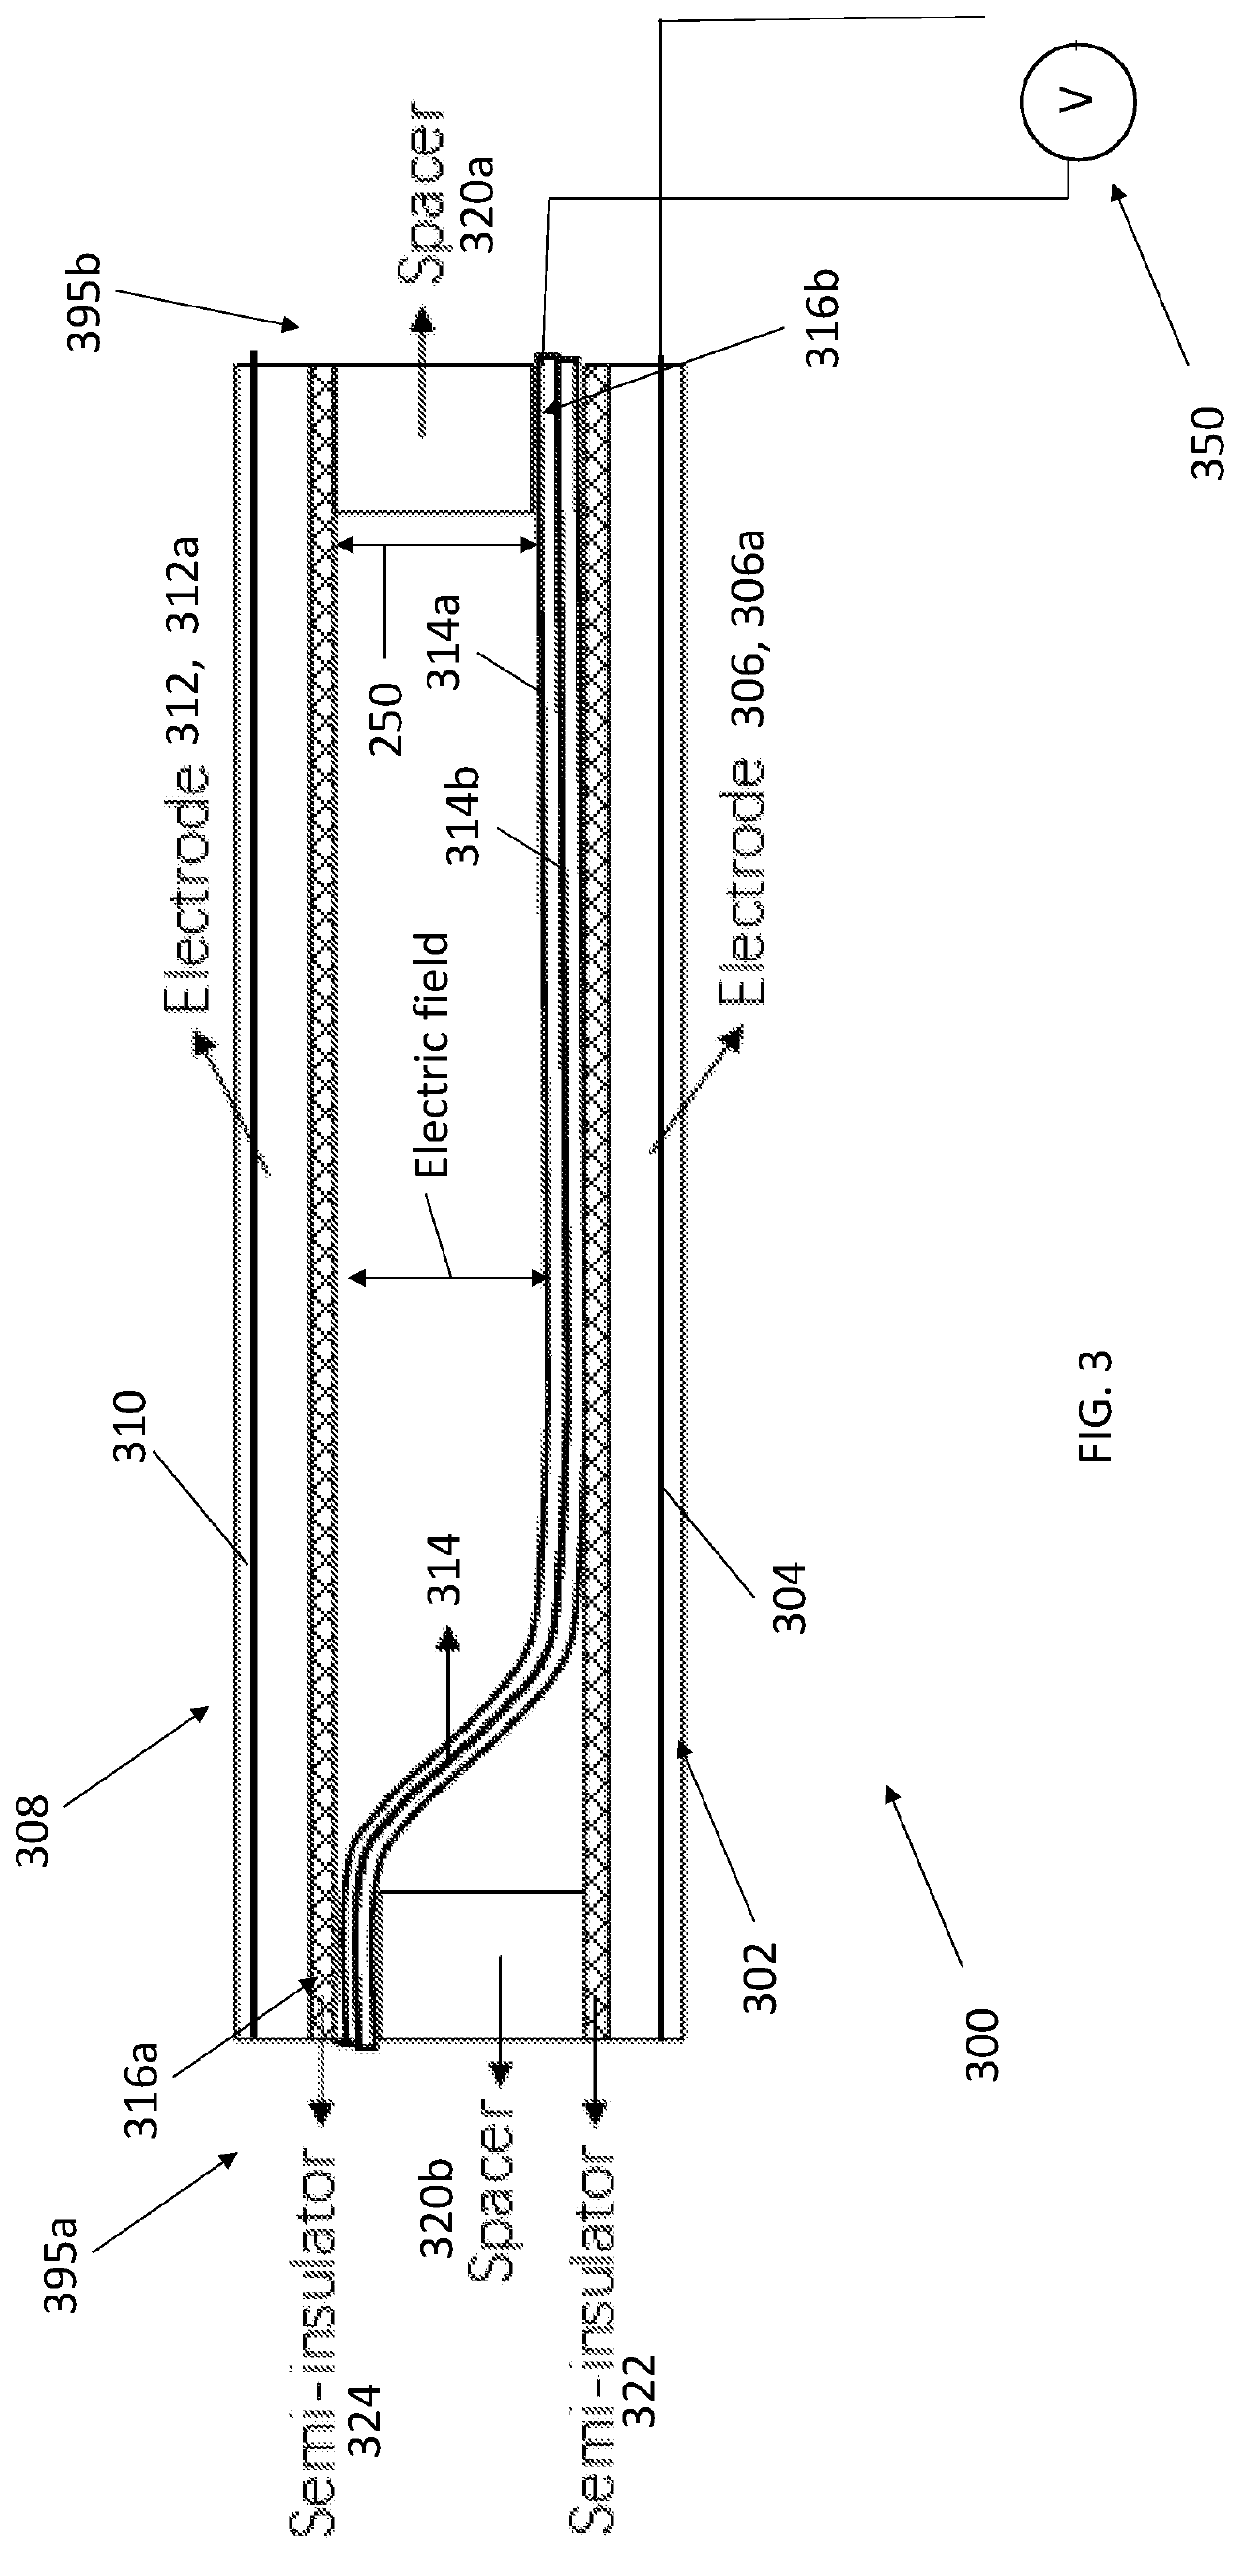 Electrostatically actuated device